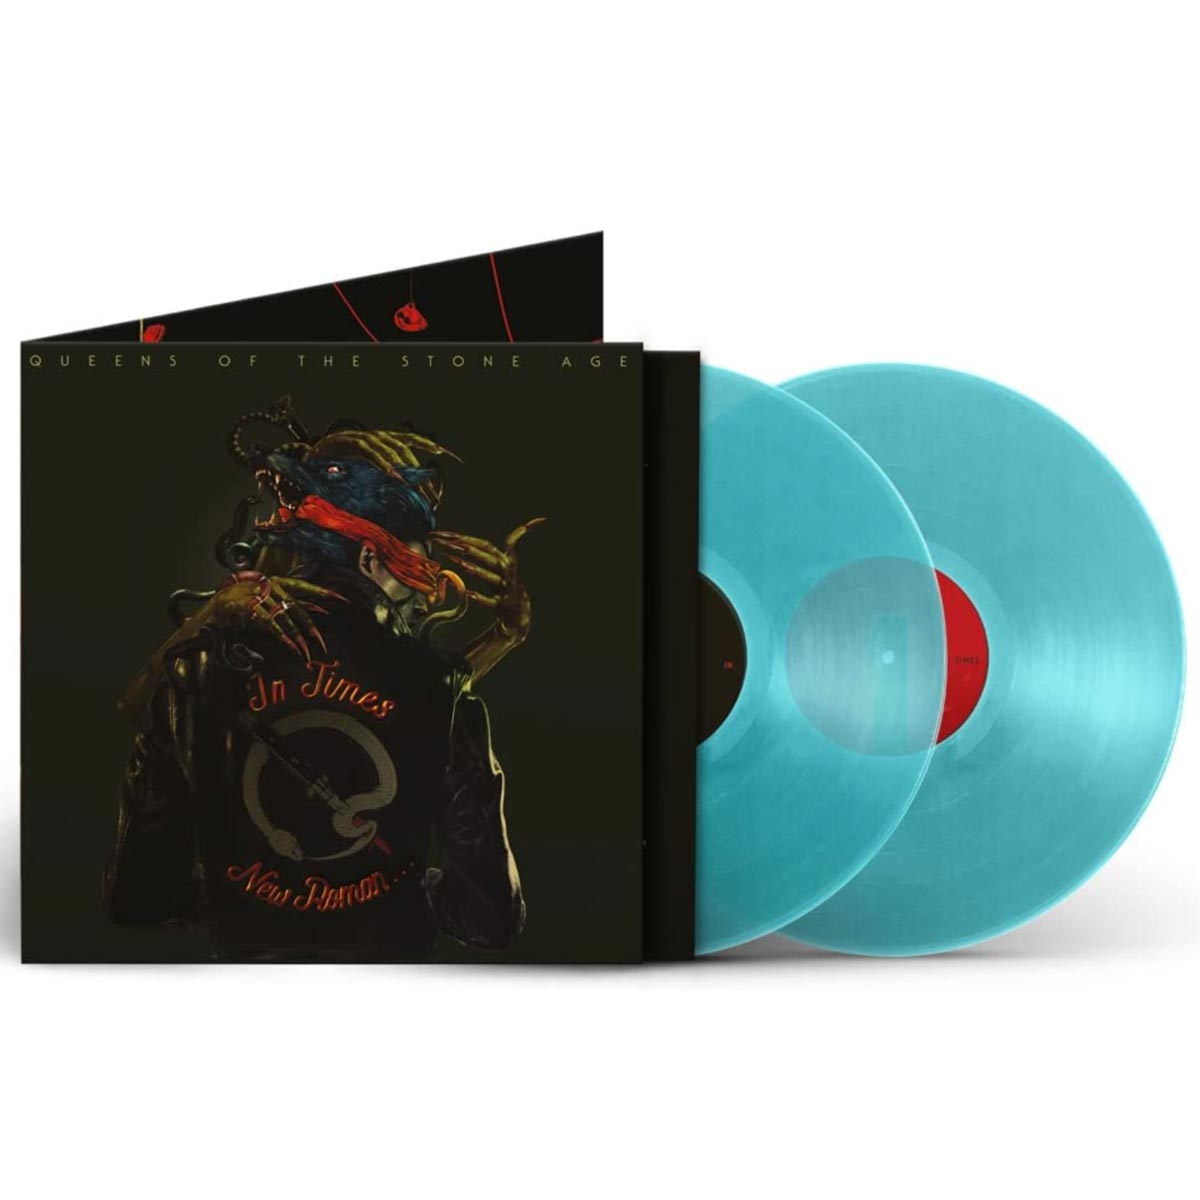 Queens Of The Stone Age - In Times New Roman... (Clear Blue Vinyl) - 2 x LP